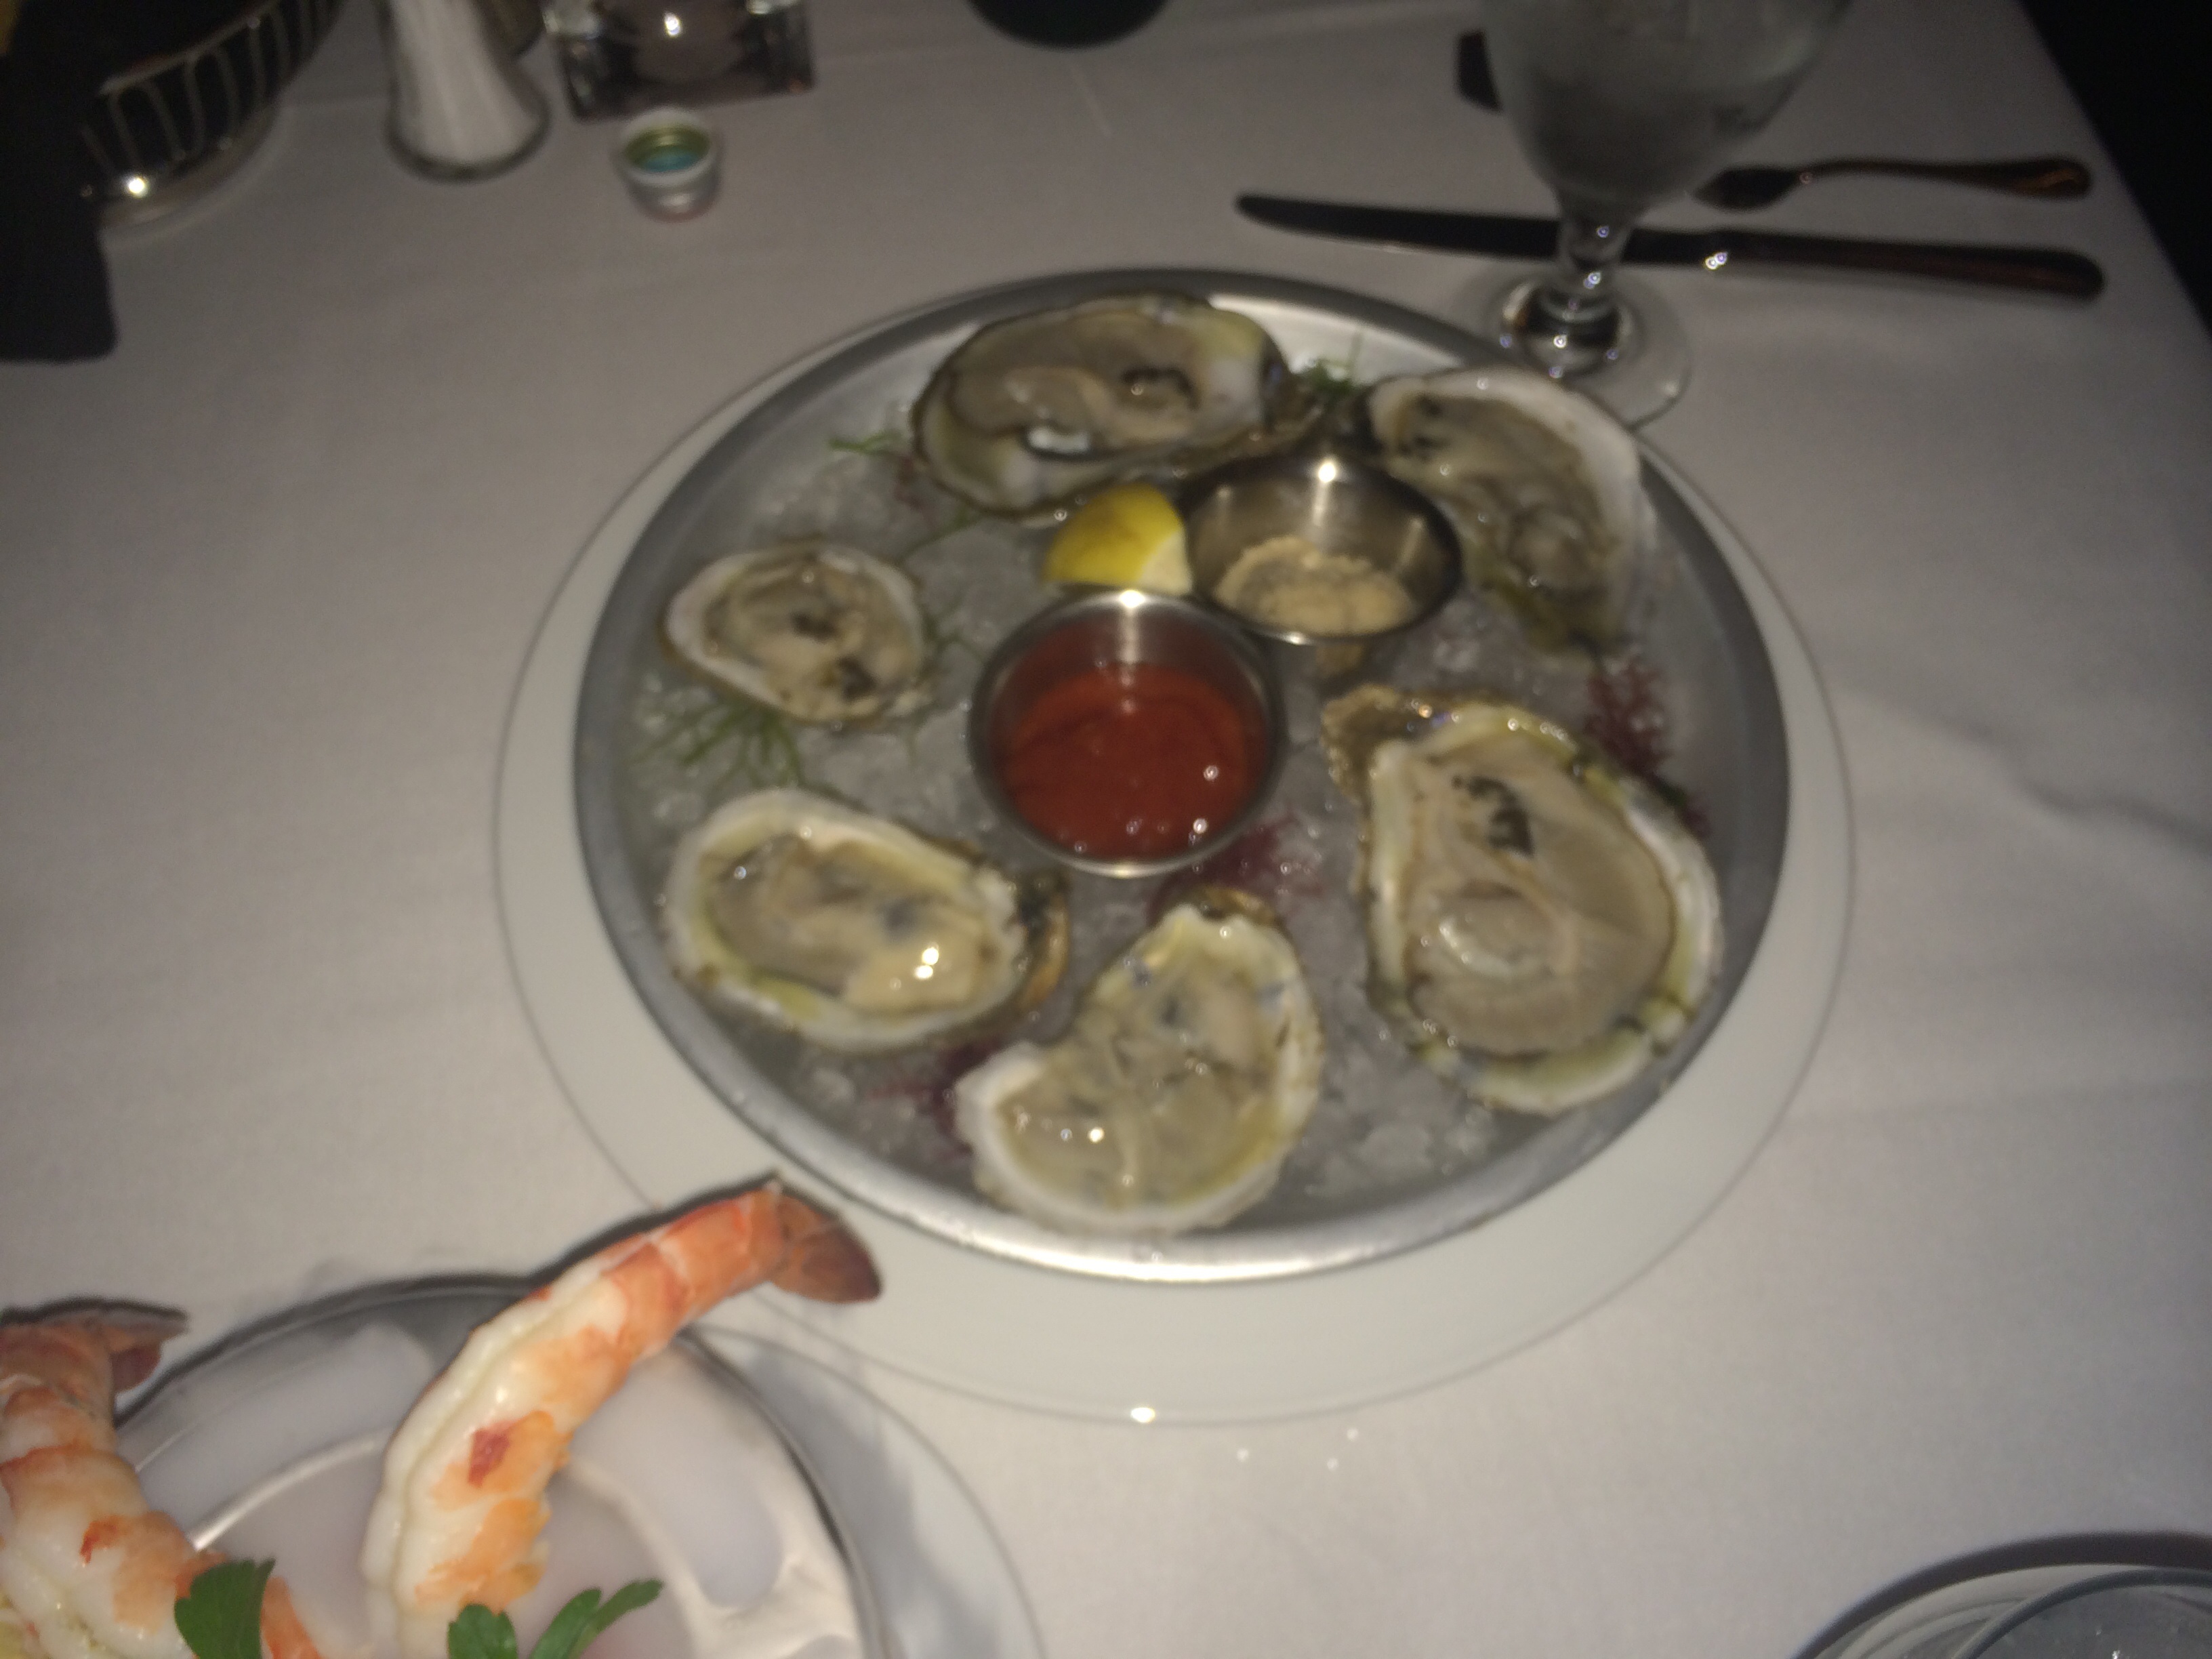 The James River Raw Oysters Appetizer